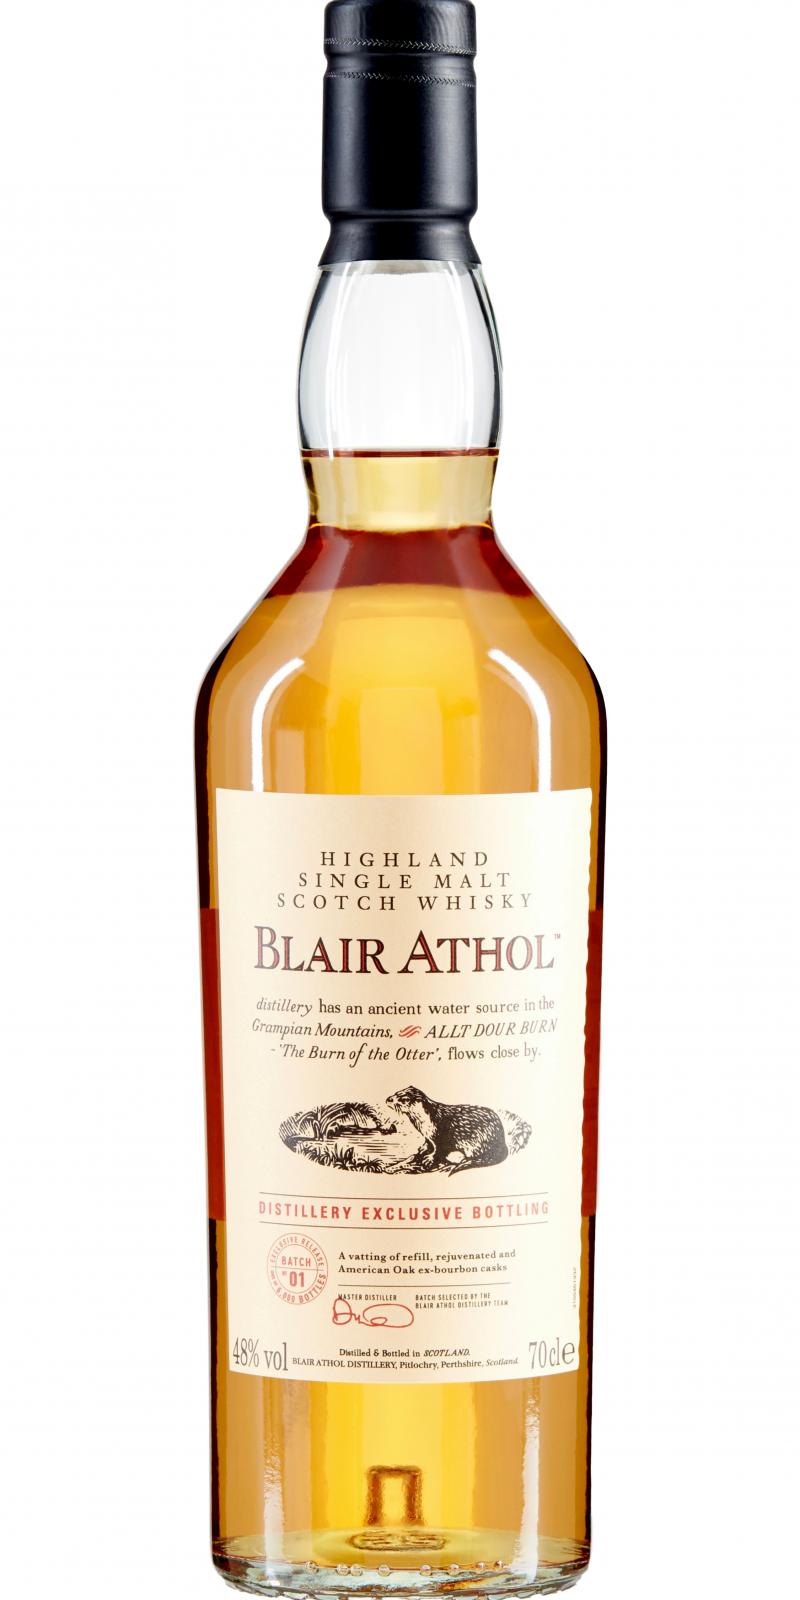 Blair Athol Distillery Exclusive Bottling - Ratings and reviews 